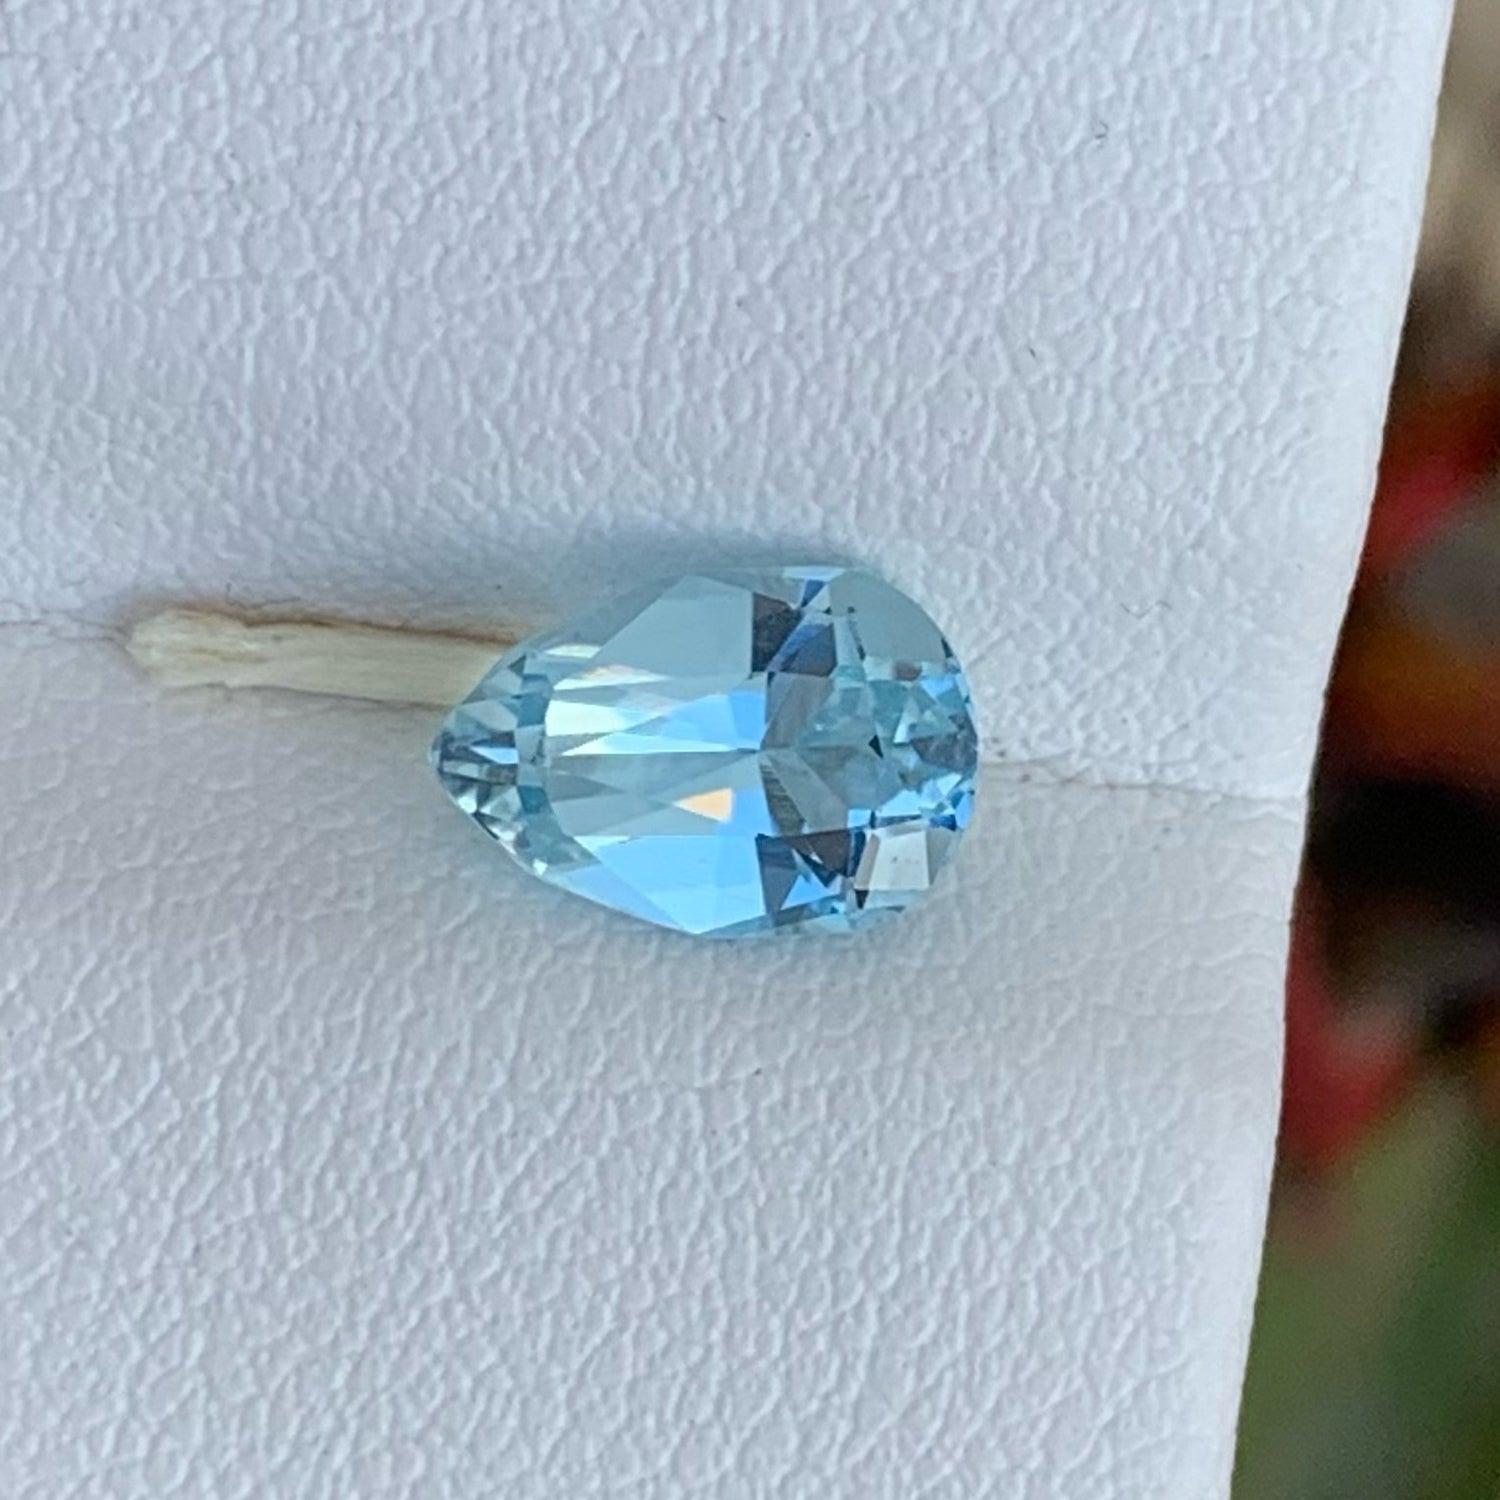 Modern Exceptional Natural Aquamarine Stone 1.35 CT Fancy Pear Cut Gemstone jewelry Use For Sale